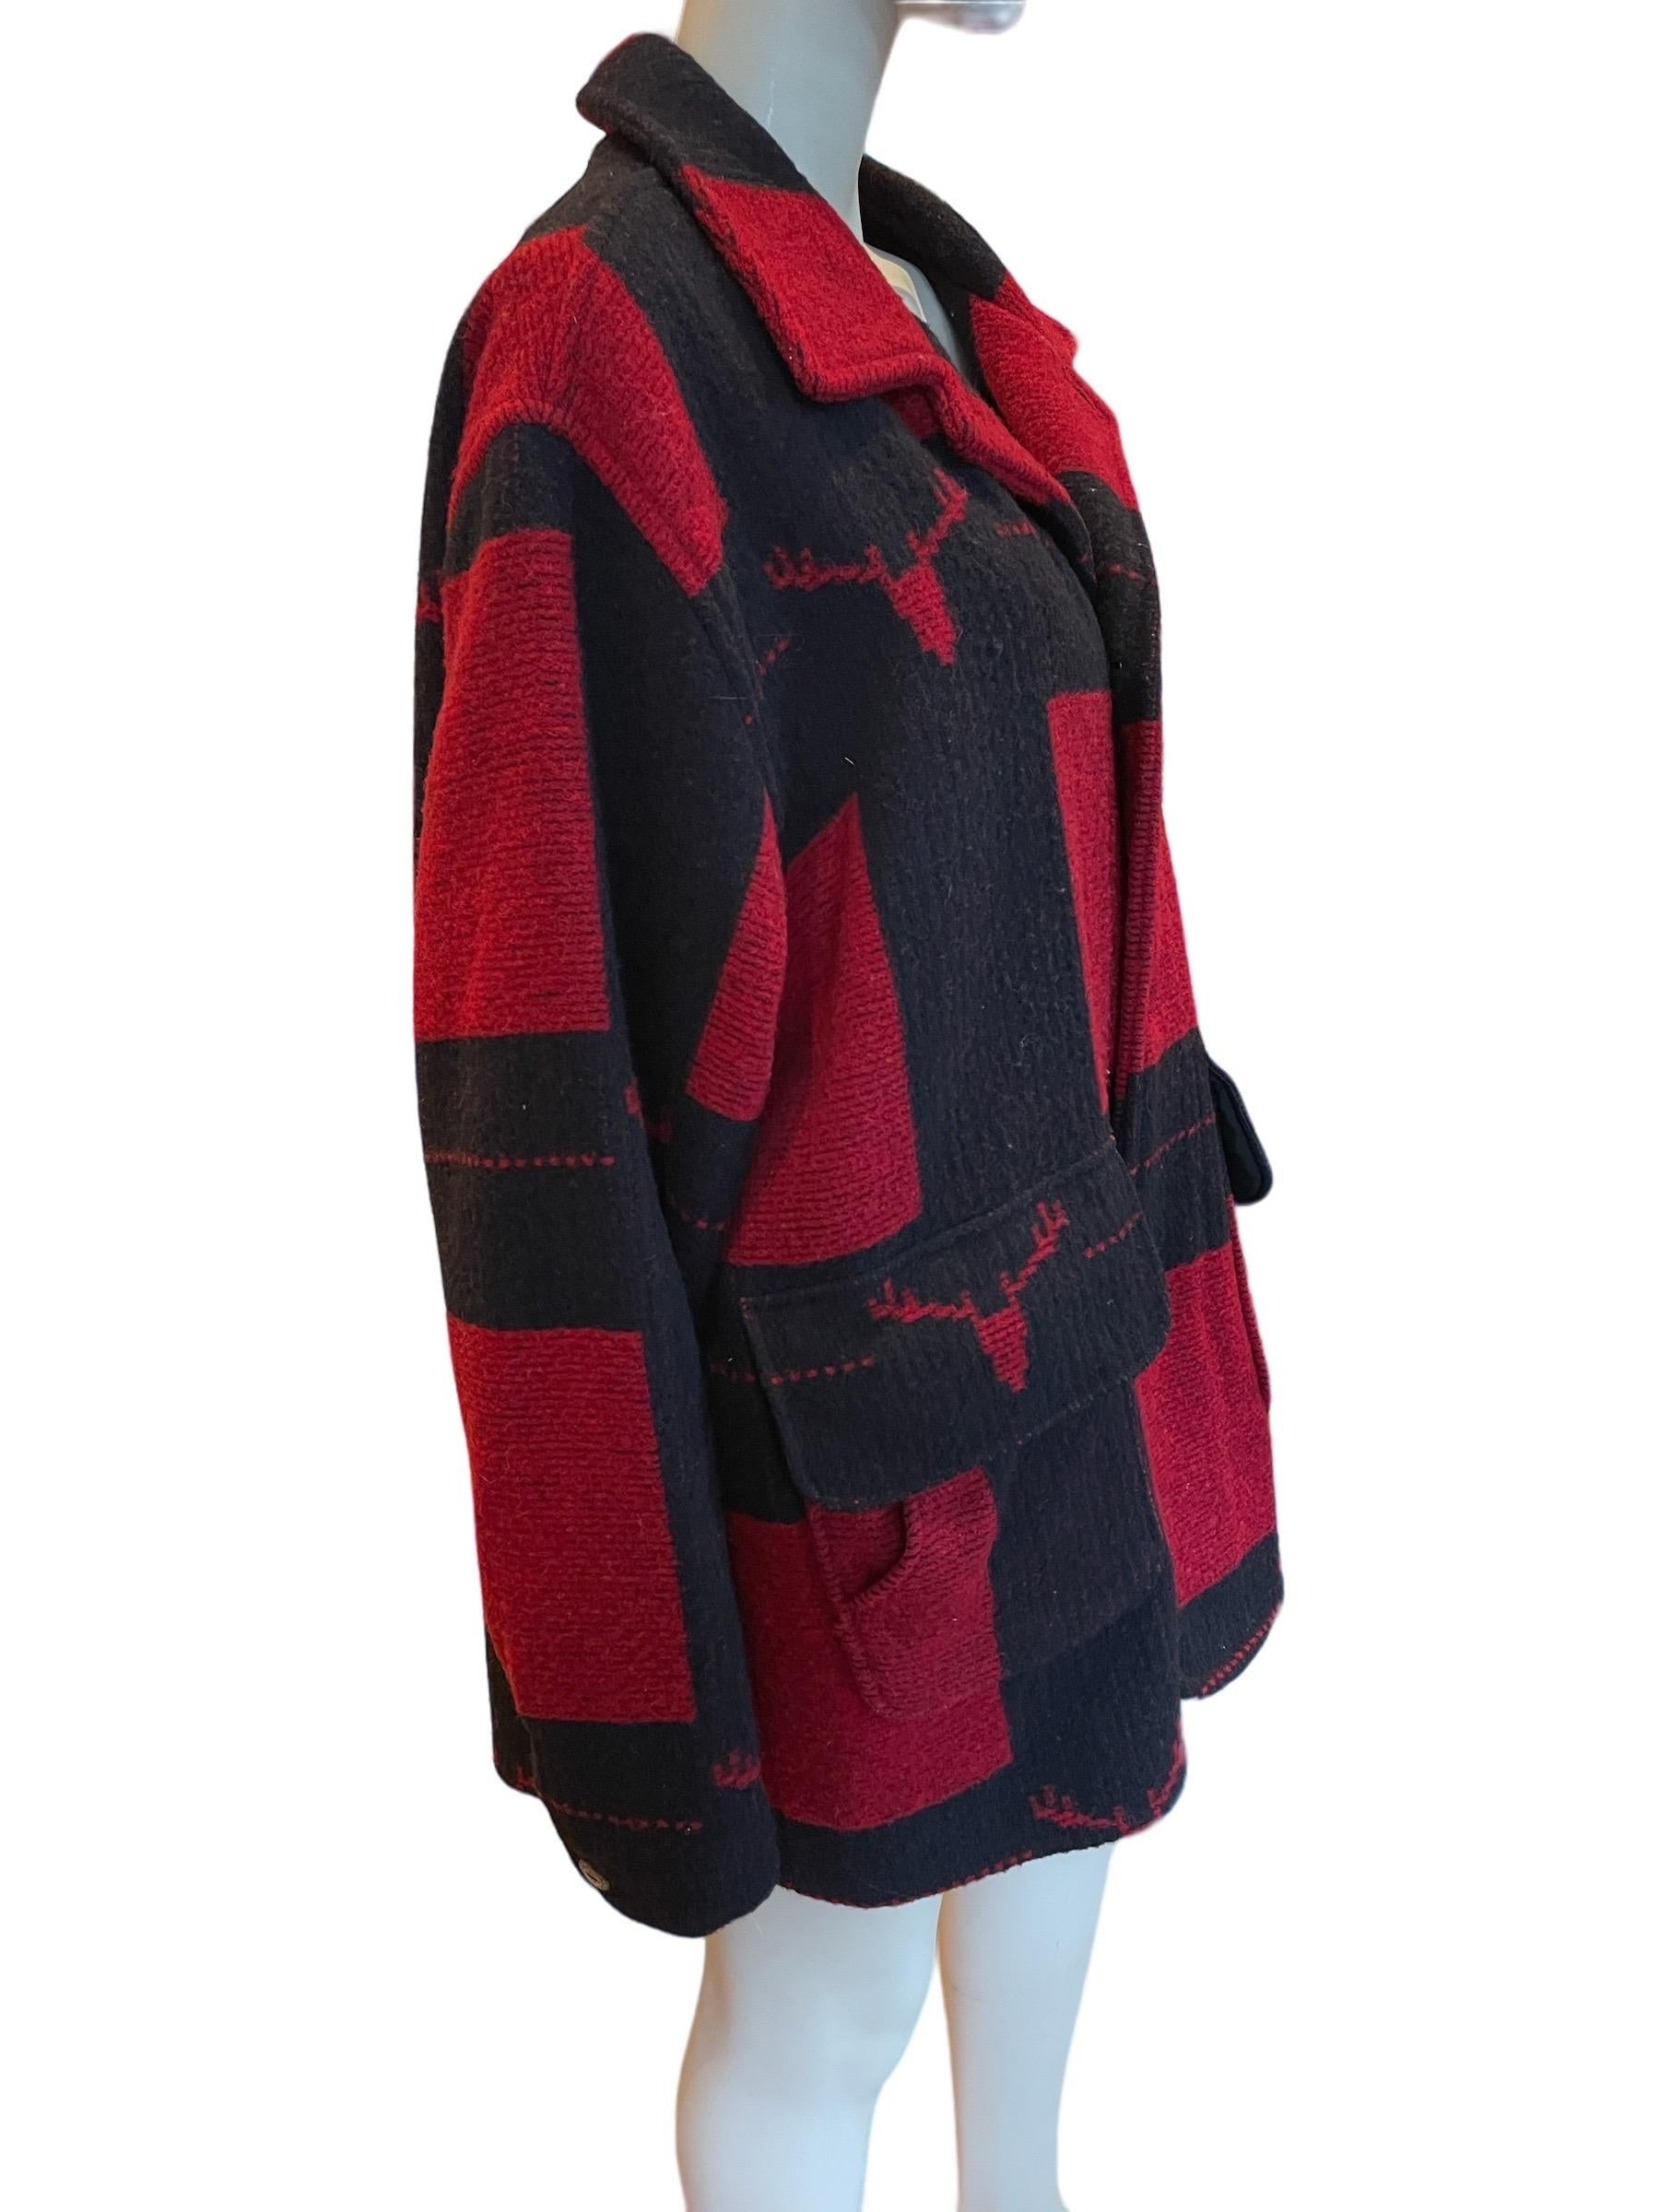 Women's or Men's 1980s Woolrich Black and Red Plaid Hunting Jacket For Sale